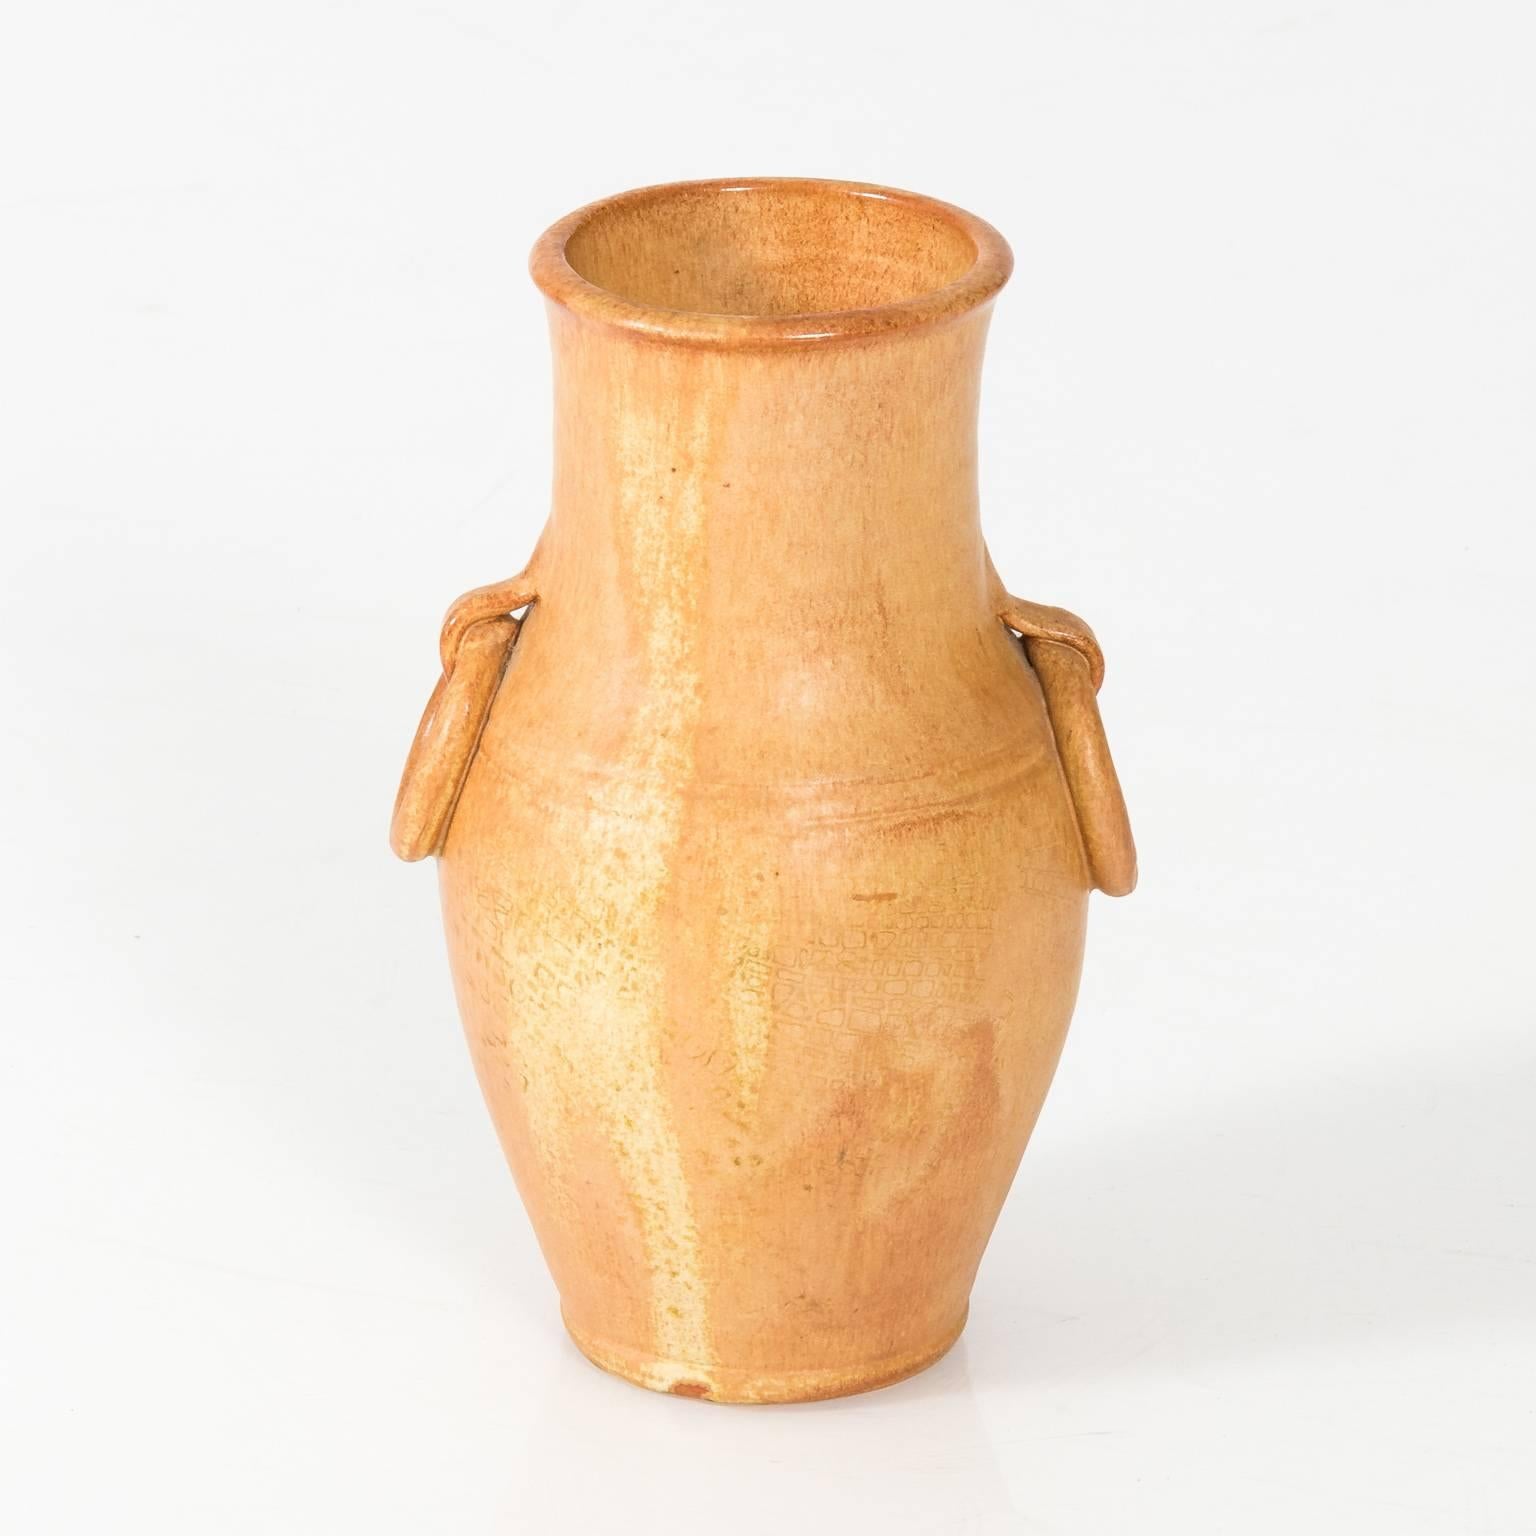 Ceramic Pottery Vase with Handles by Seagrove